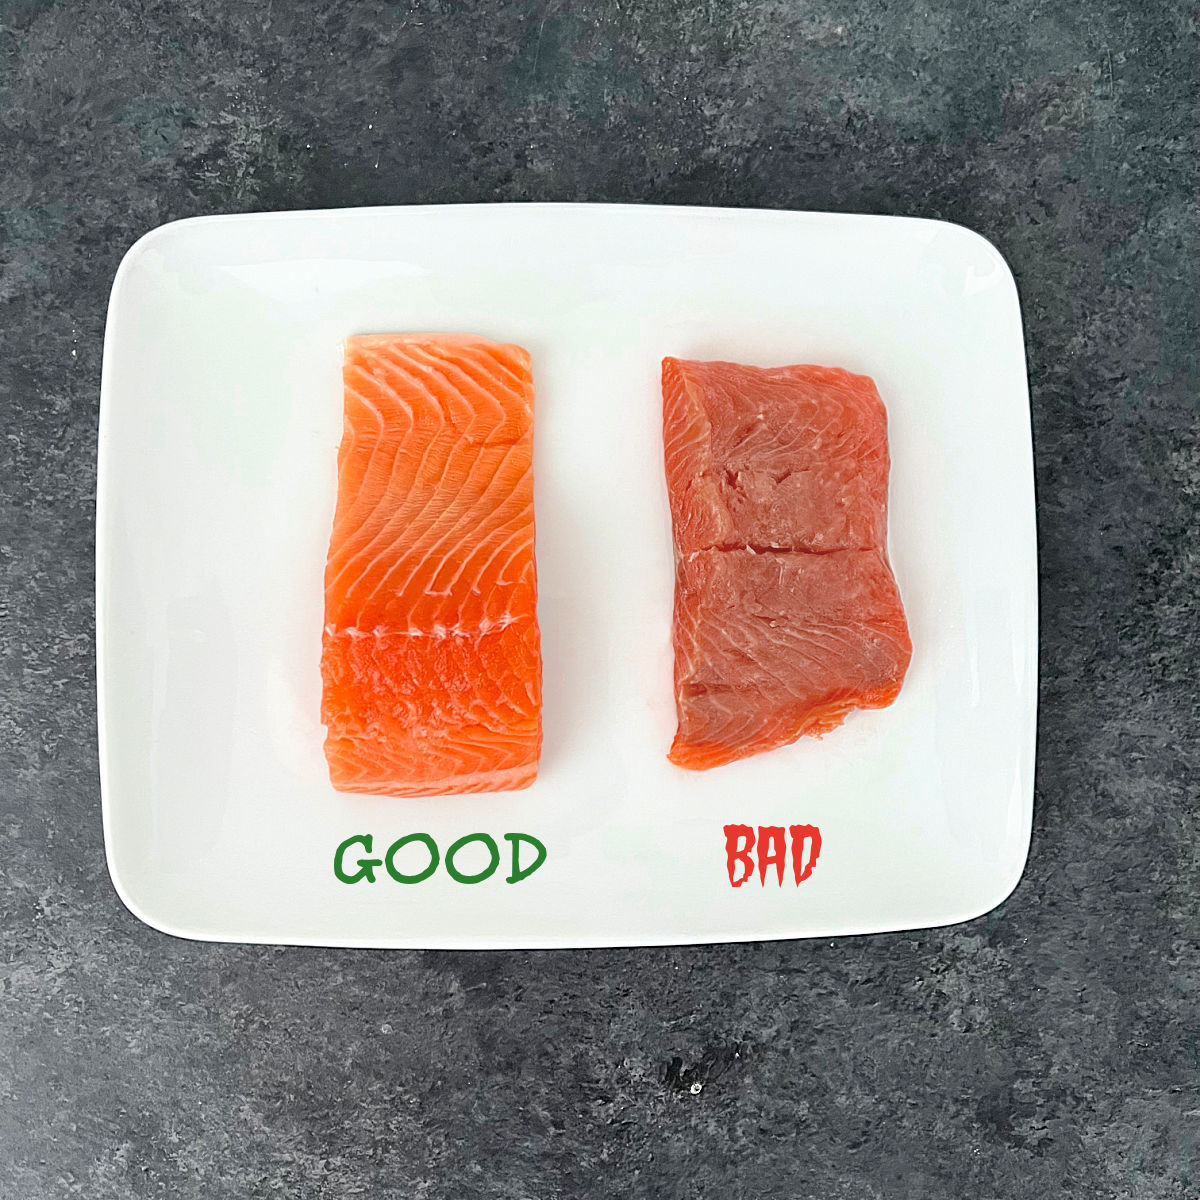 A piece of good salmon and a piece of bad salmon on a white plate.